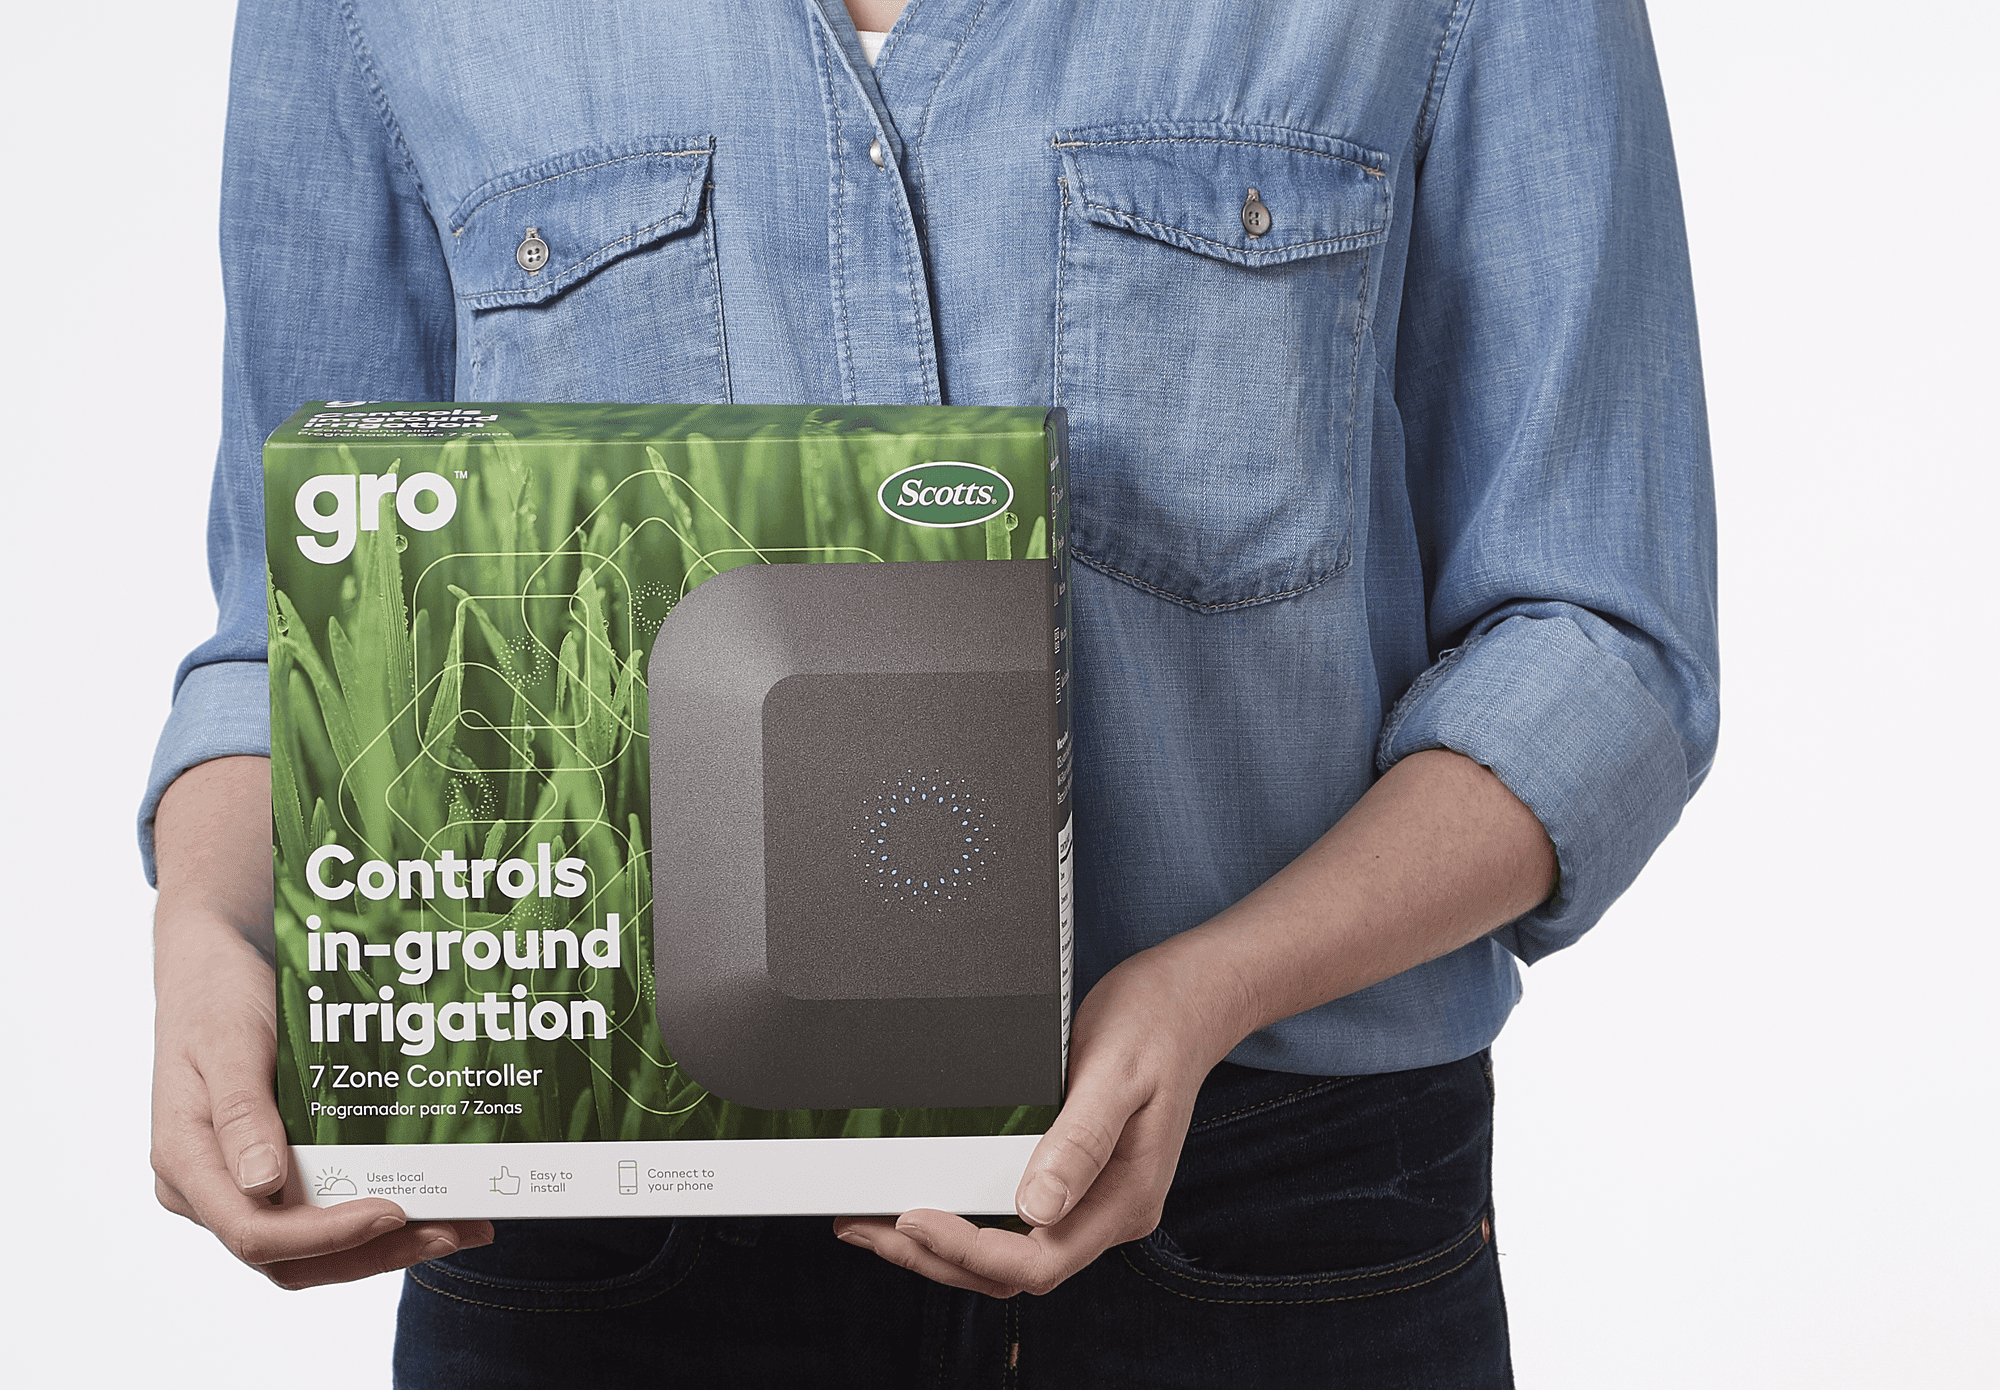 Gro 7 Zone Controller from Scotts|Works With Alexa & Google Assistant|Easily Control Water For Up To 7 Zones|Uses Real Time Weather Data To Automatically Adjust Watering Schedule & Reduce Water Waste 